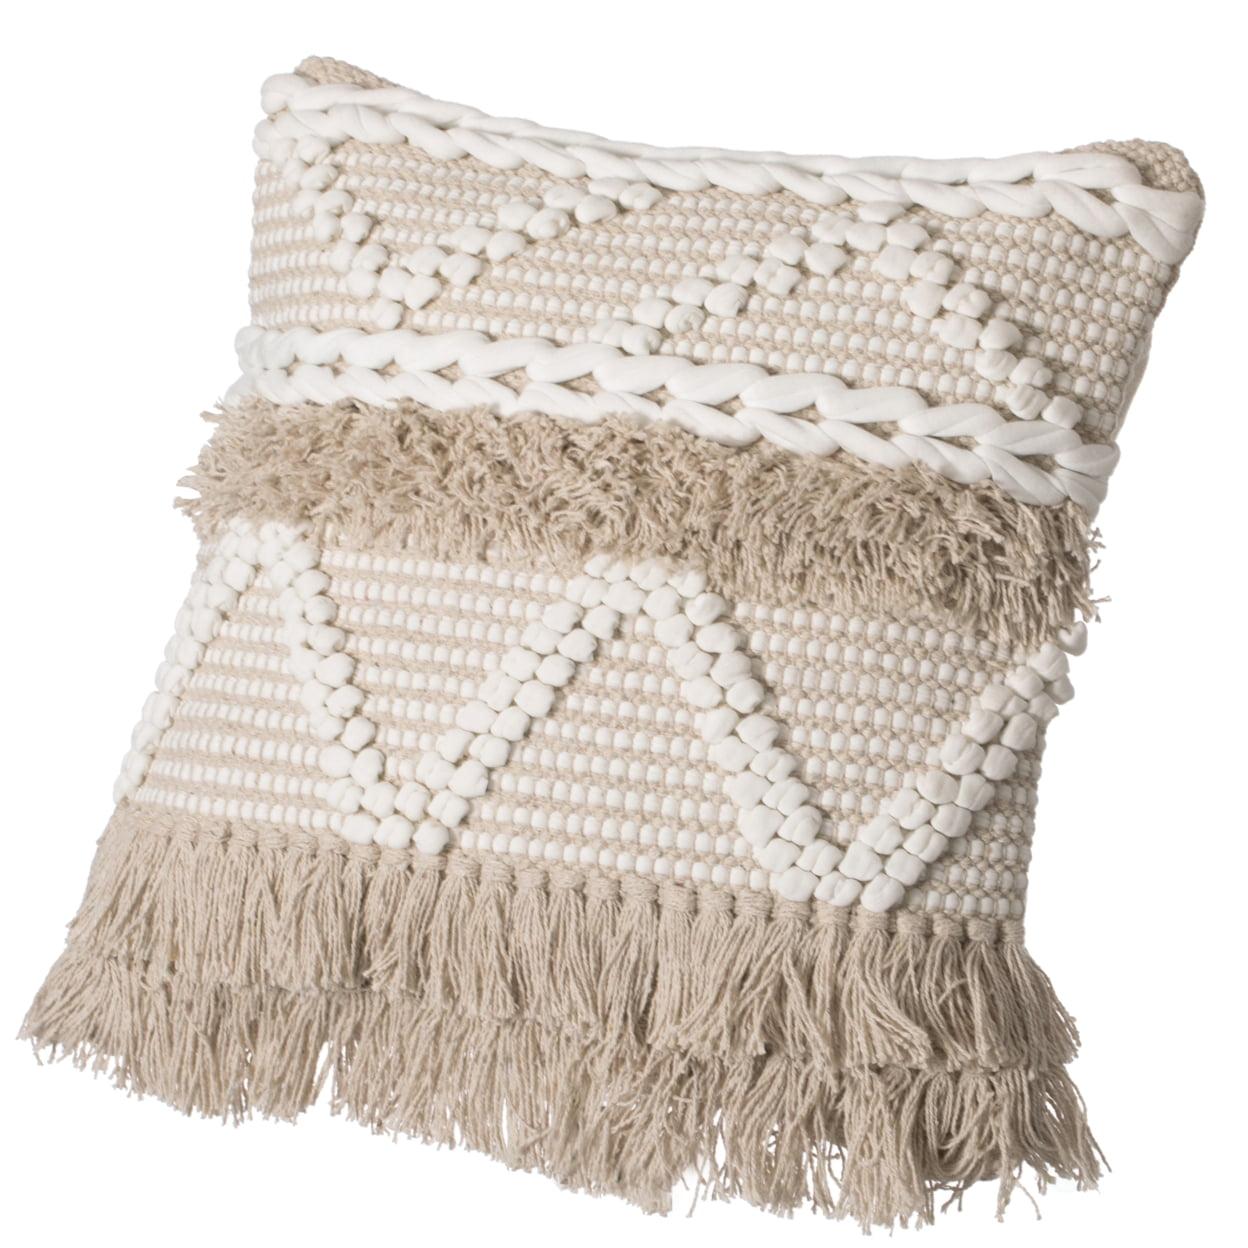 Handwoven Cotton Euro Pillow Cover with White Dot Pattern